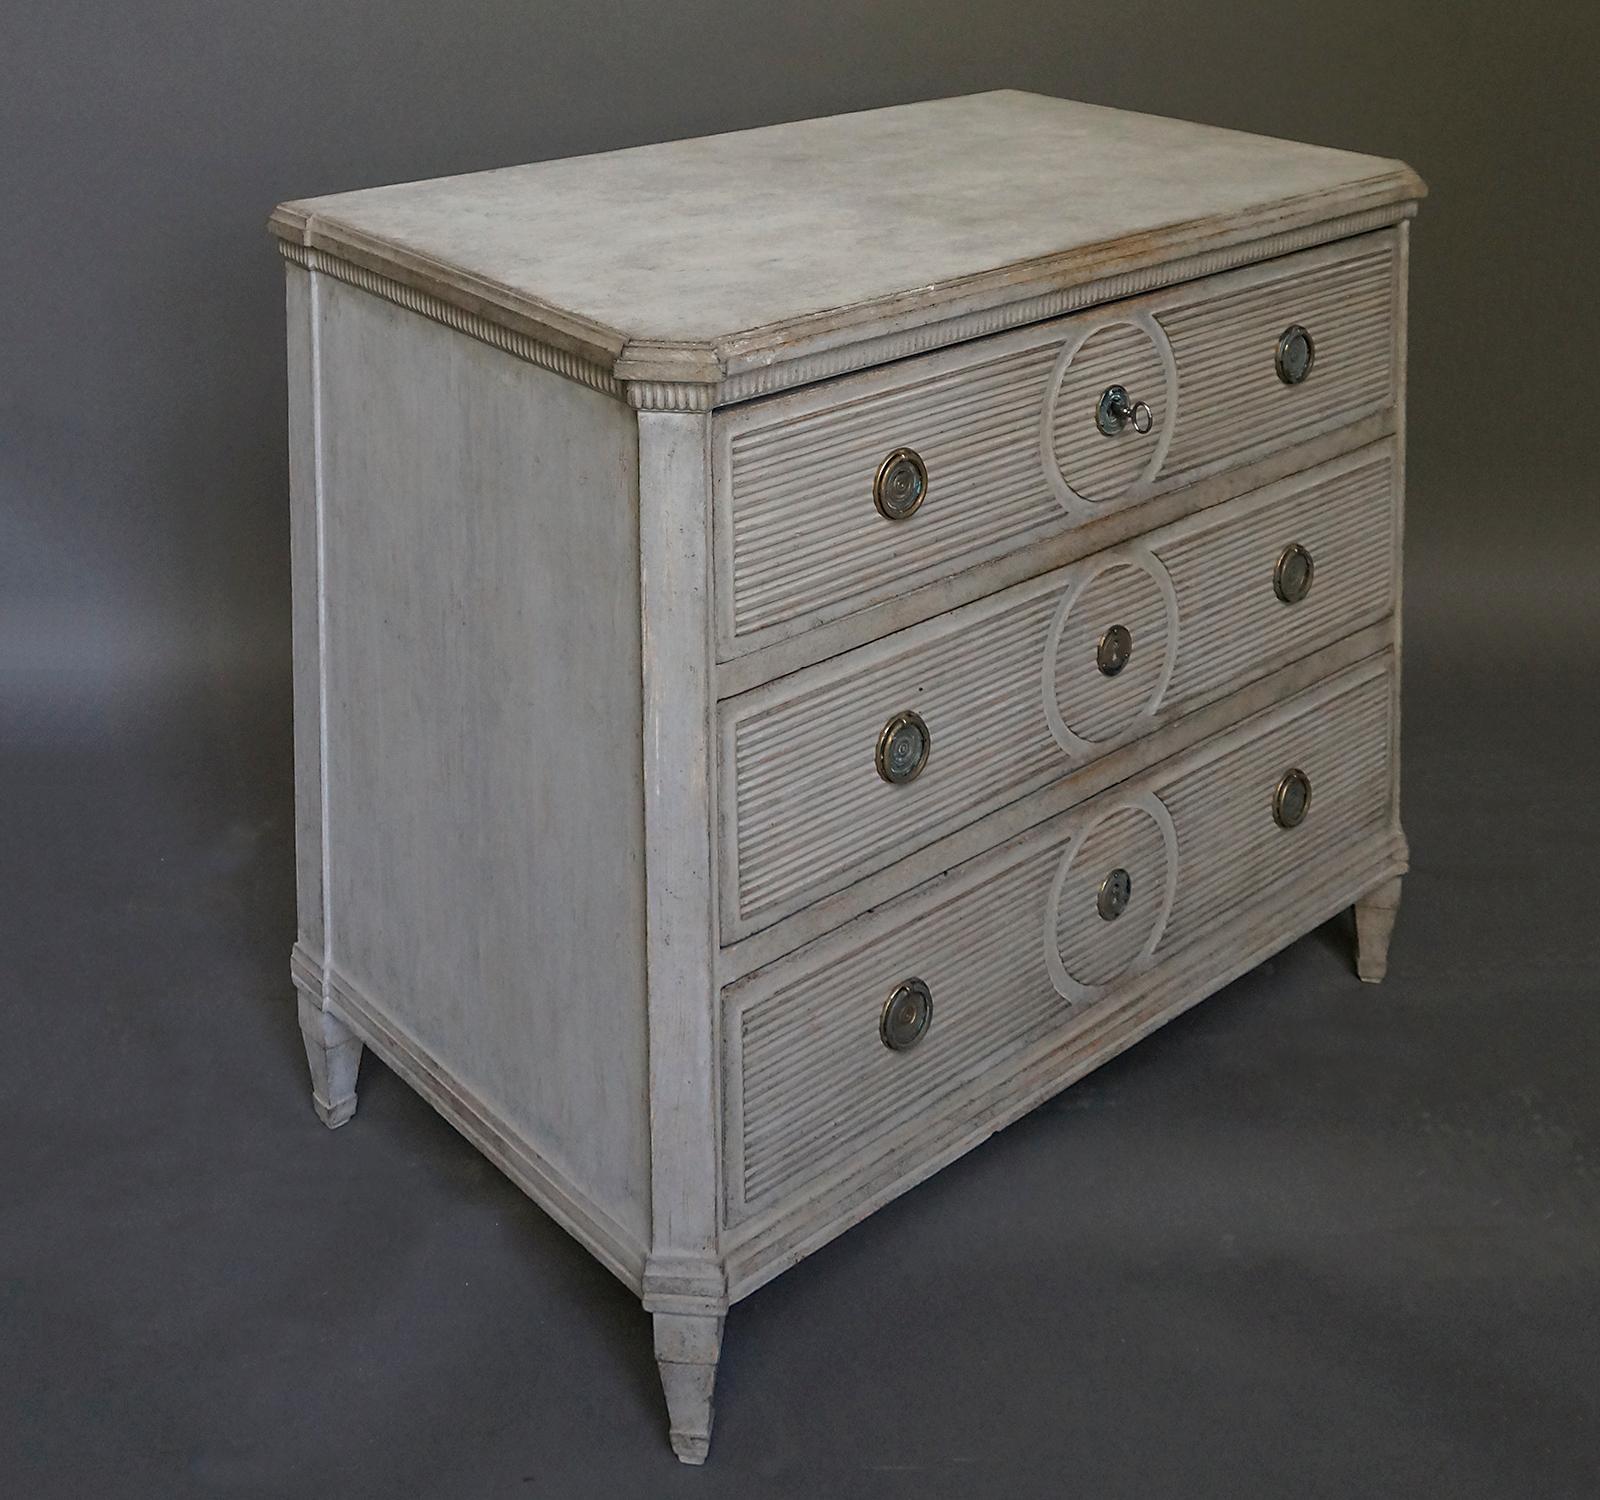 Hand-Carved Neoclassical Chest of Drawers with Reeded Detail